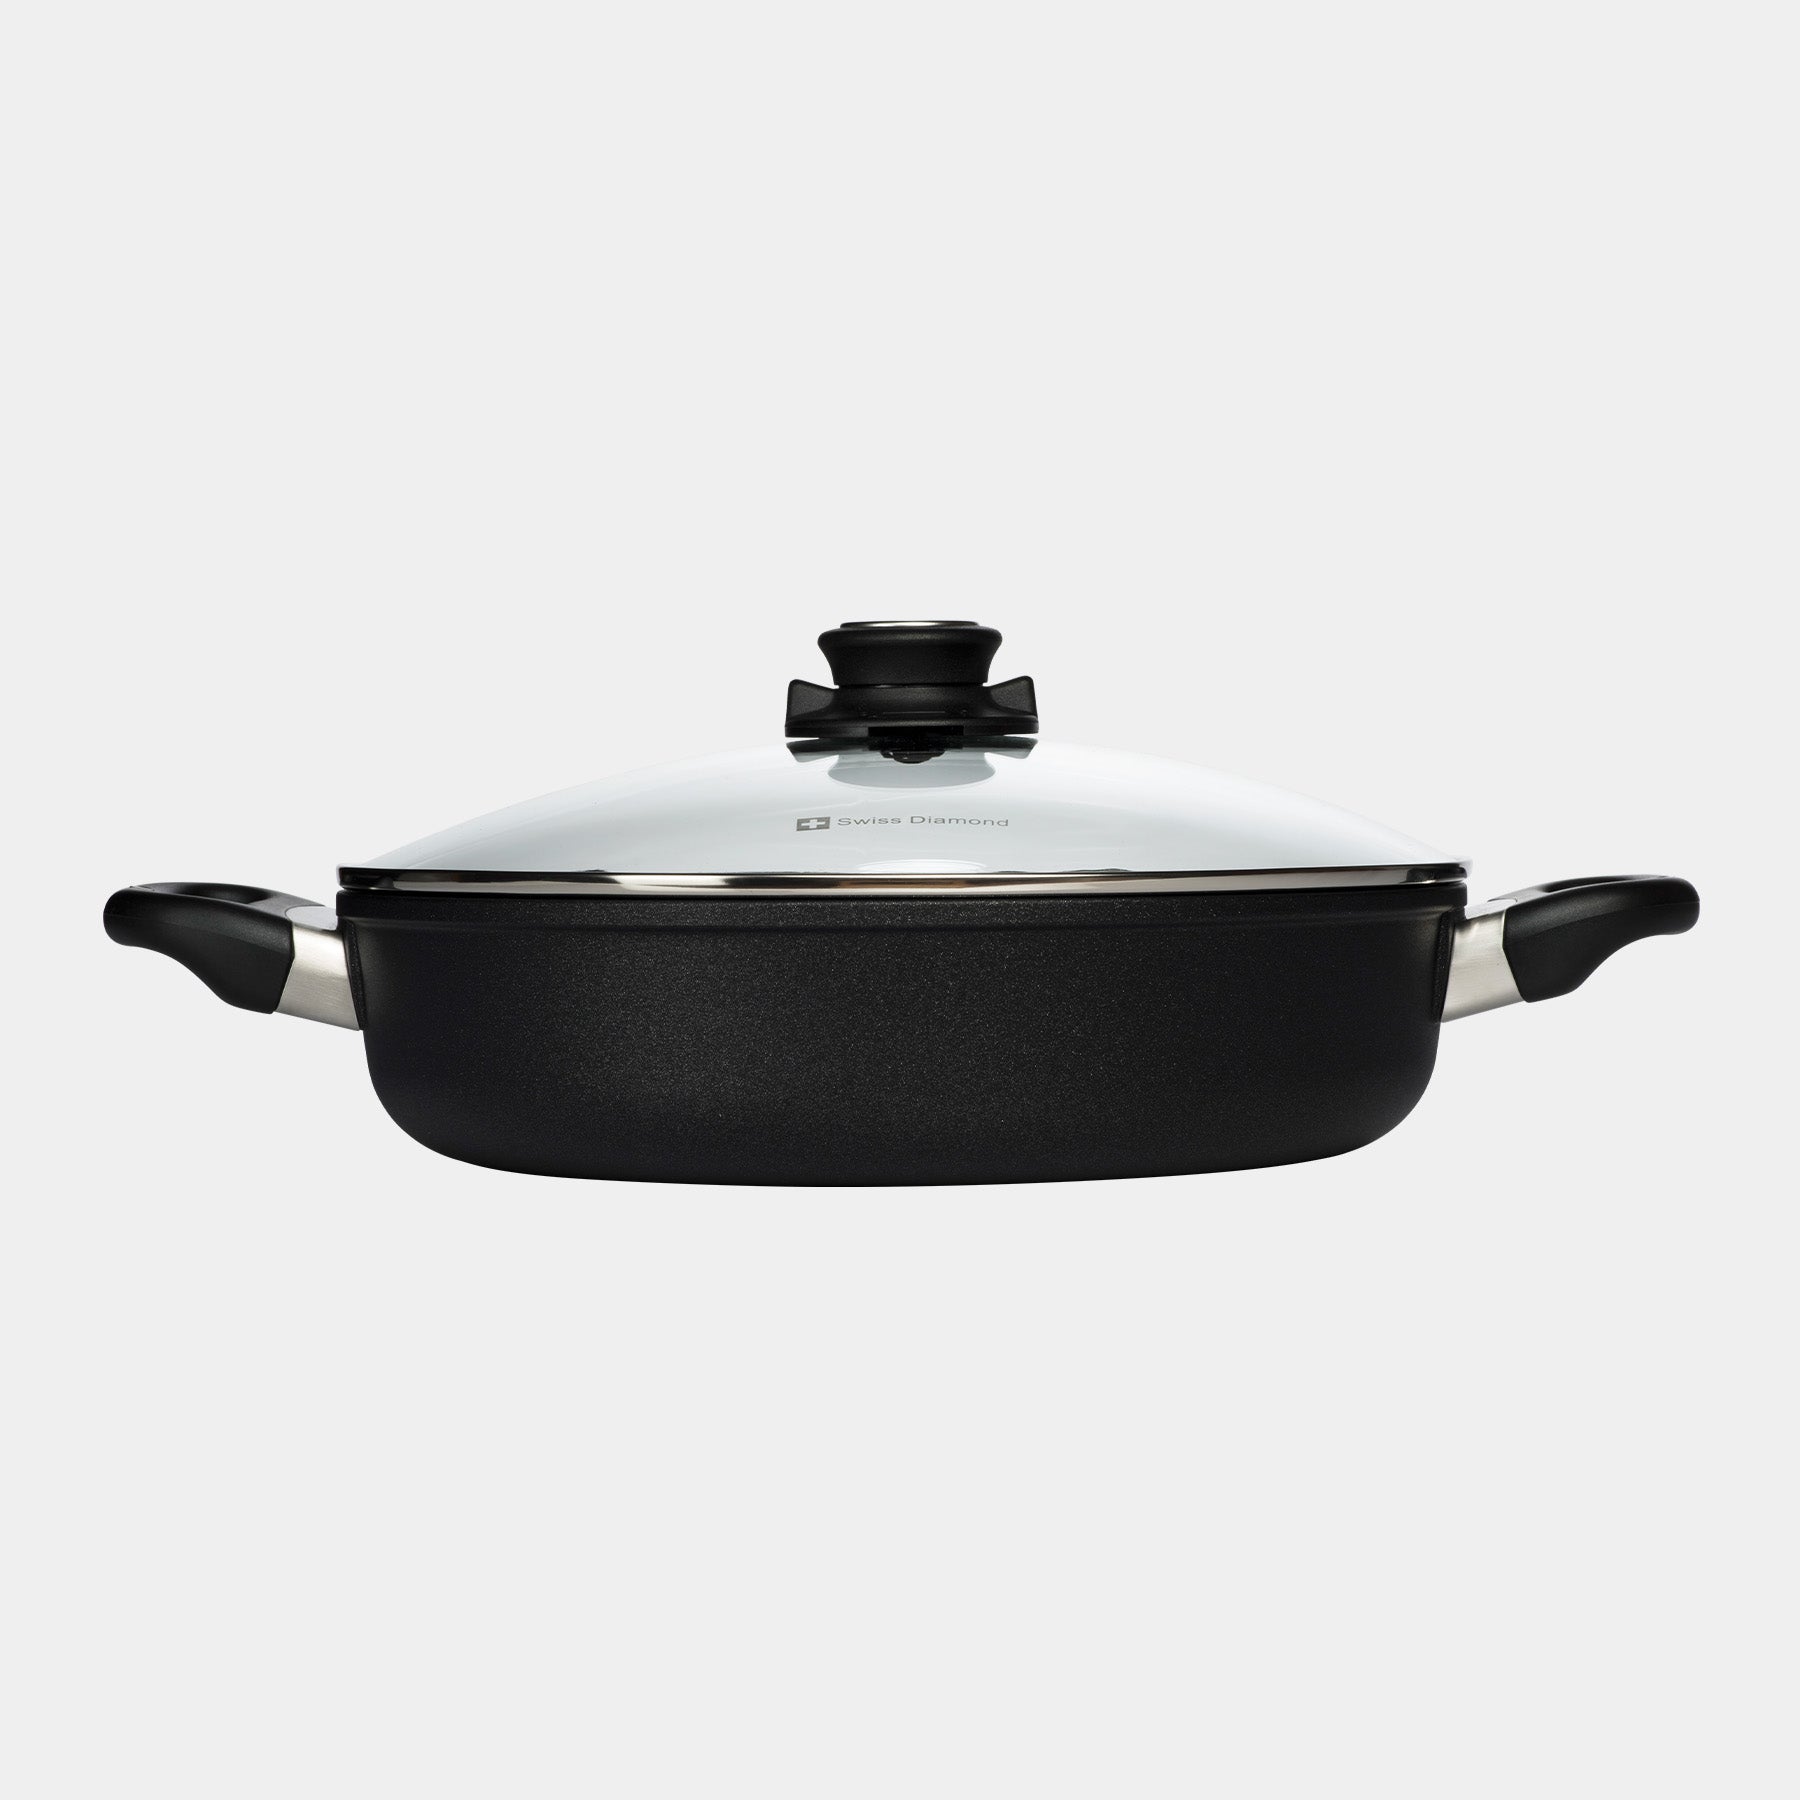 XD Nonstick 11" Sauteuse with Glass Side View Lid